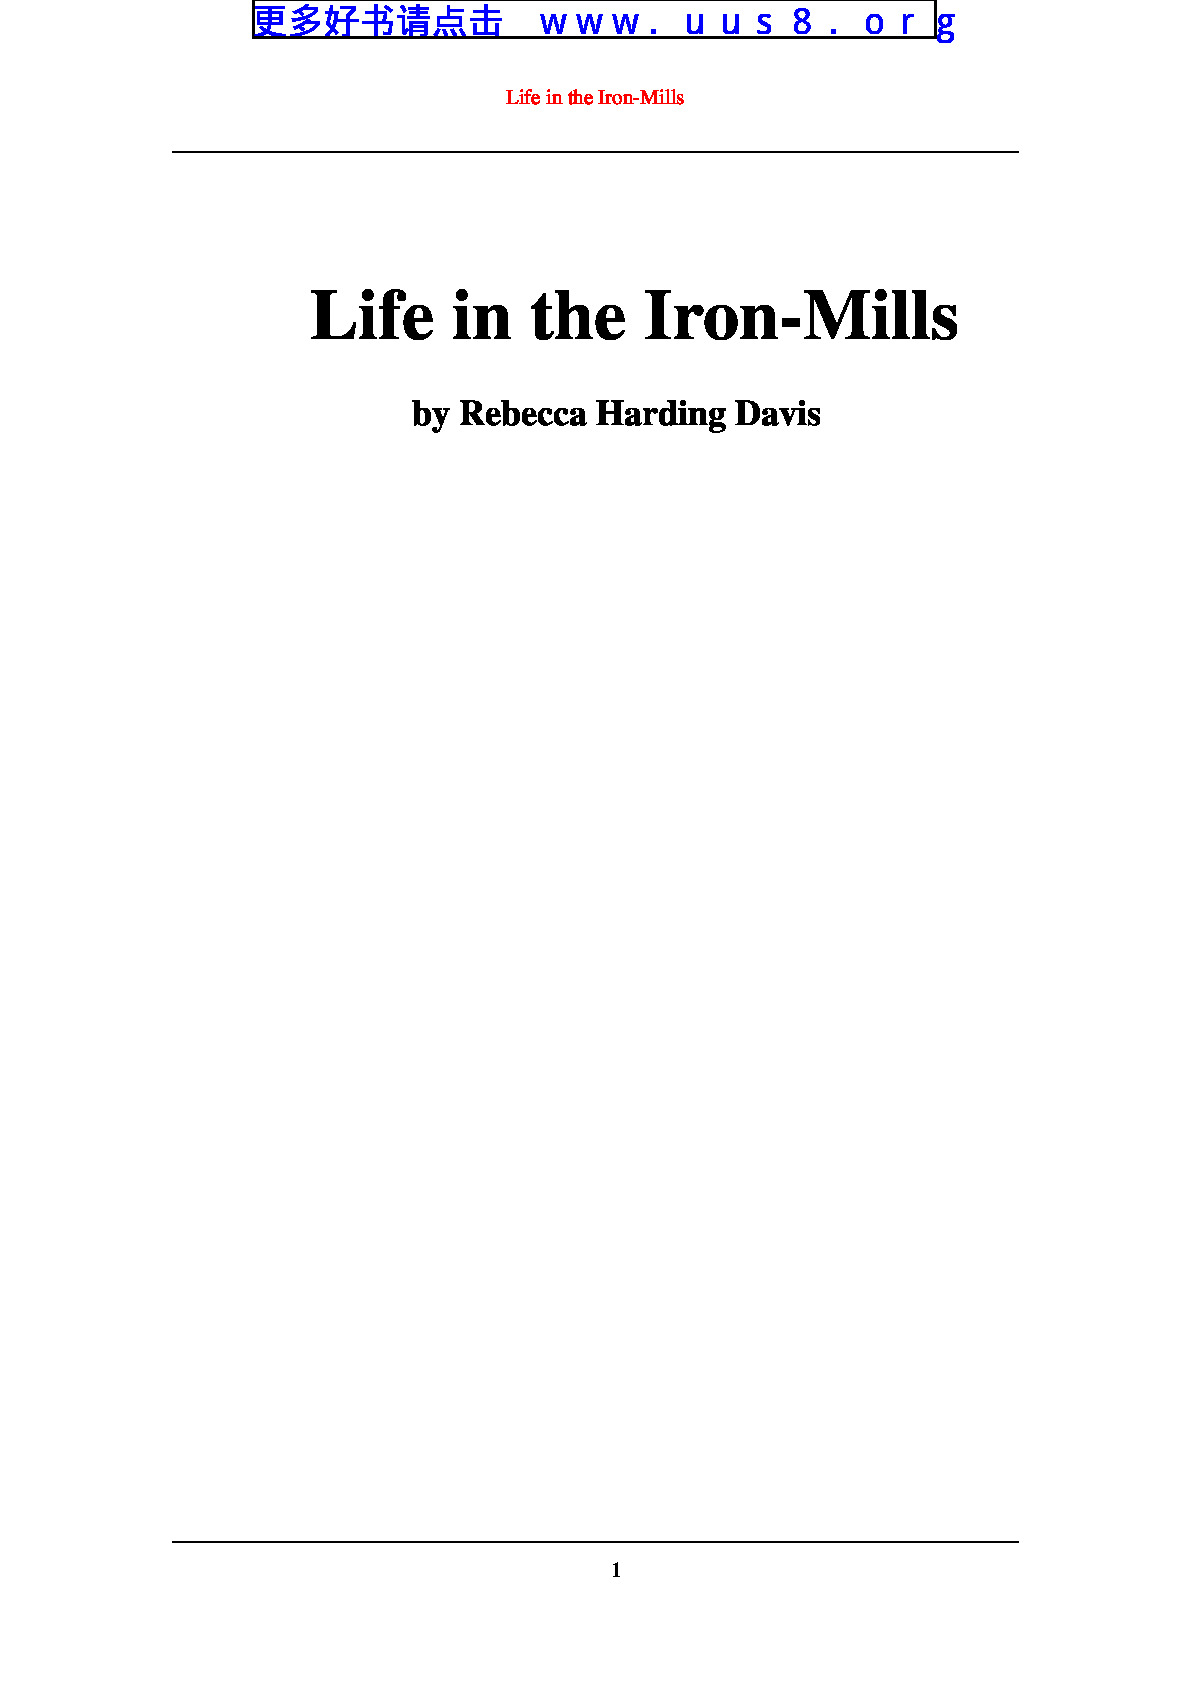 Life_in_the_Iron-Mills(铁磨房的生活)